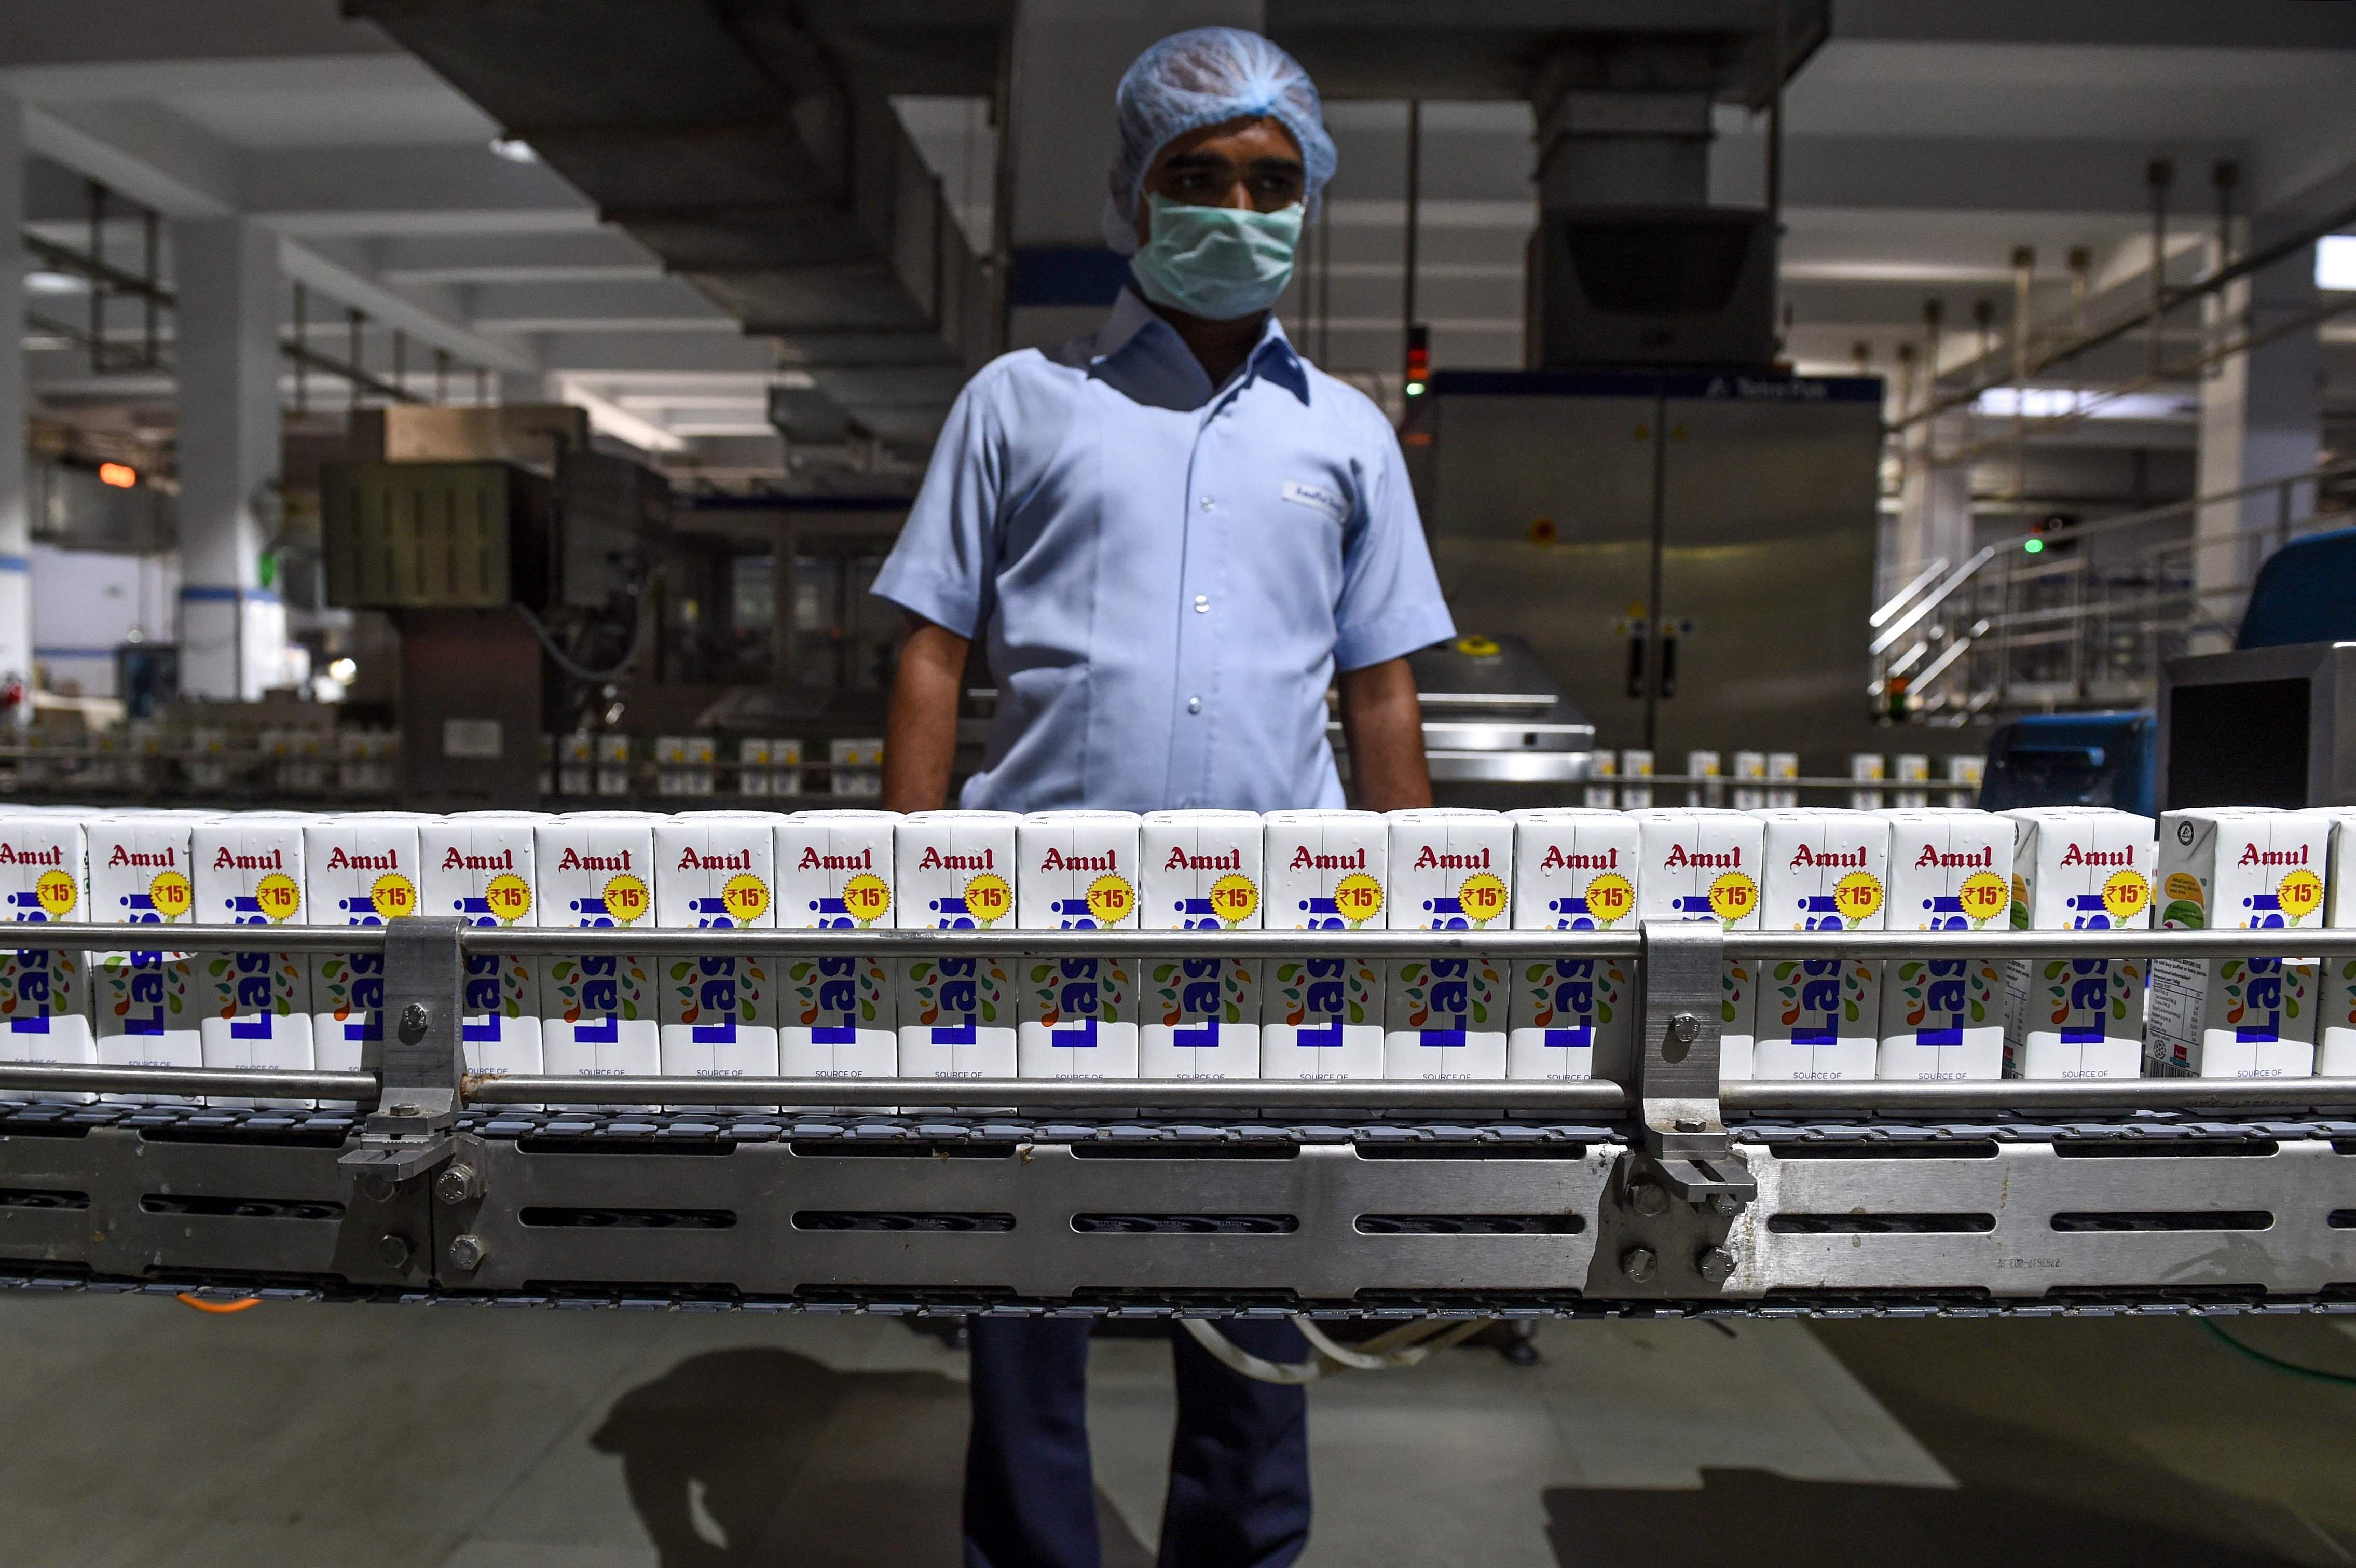 An Indian employee monitors tetra packs of lassi going through the production line at the Mother Dairy factory, which manufactures the Amul brand of ice cream, buttermilk. (AFP Photo)